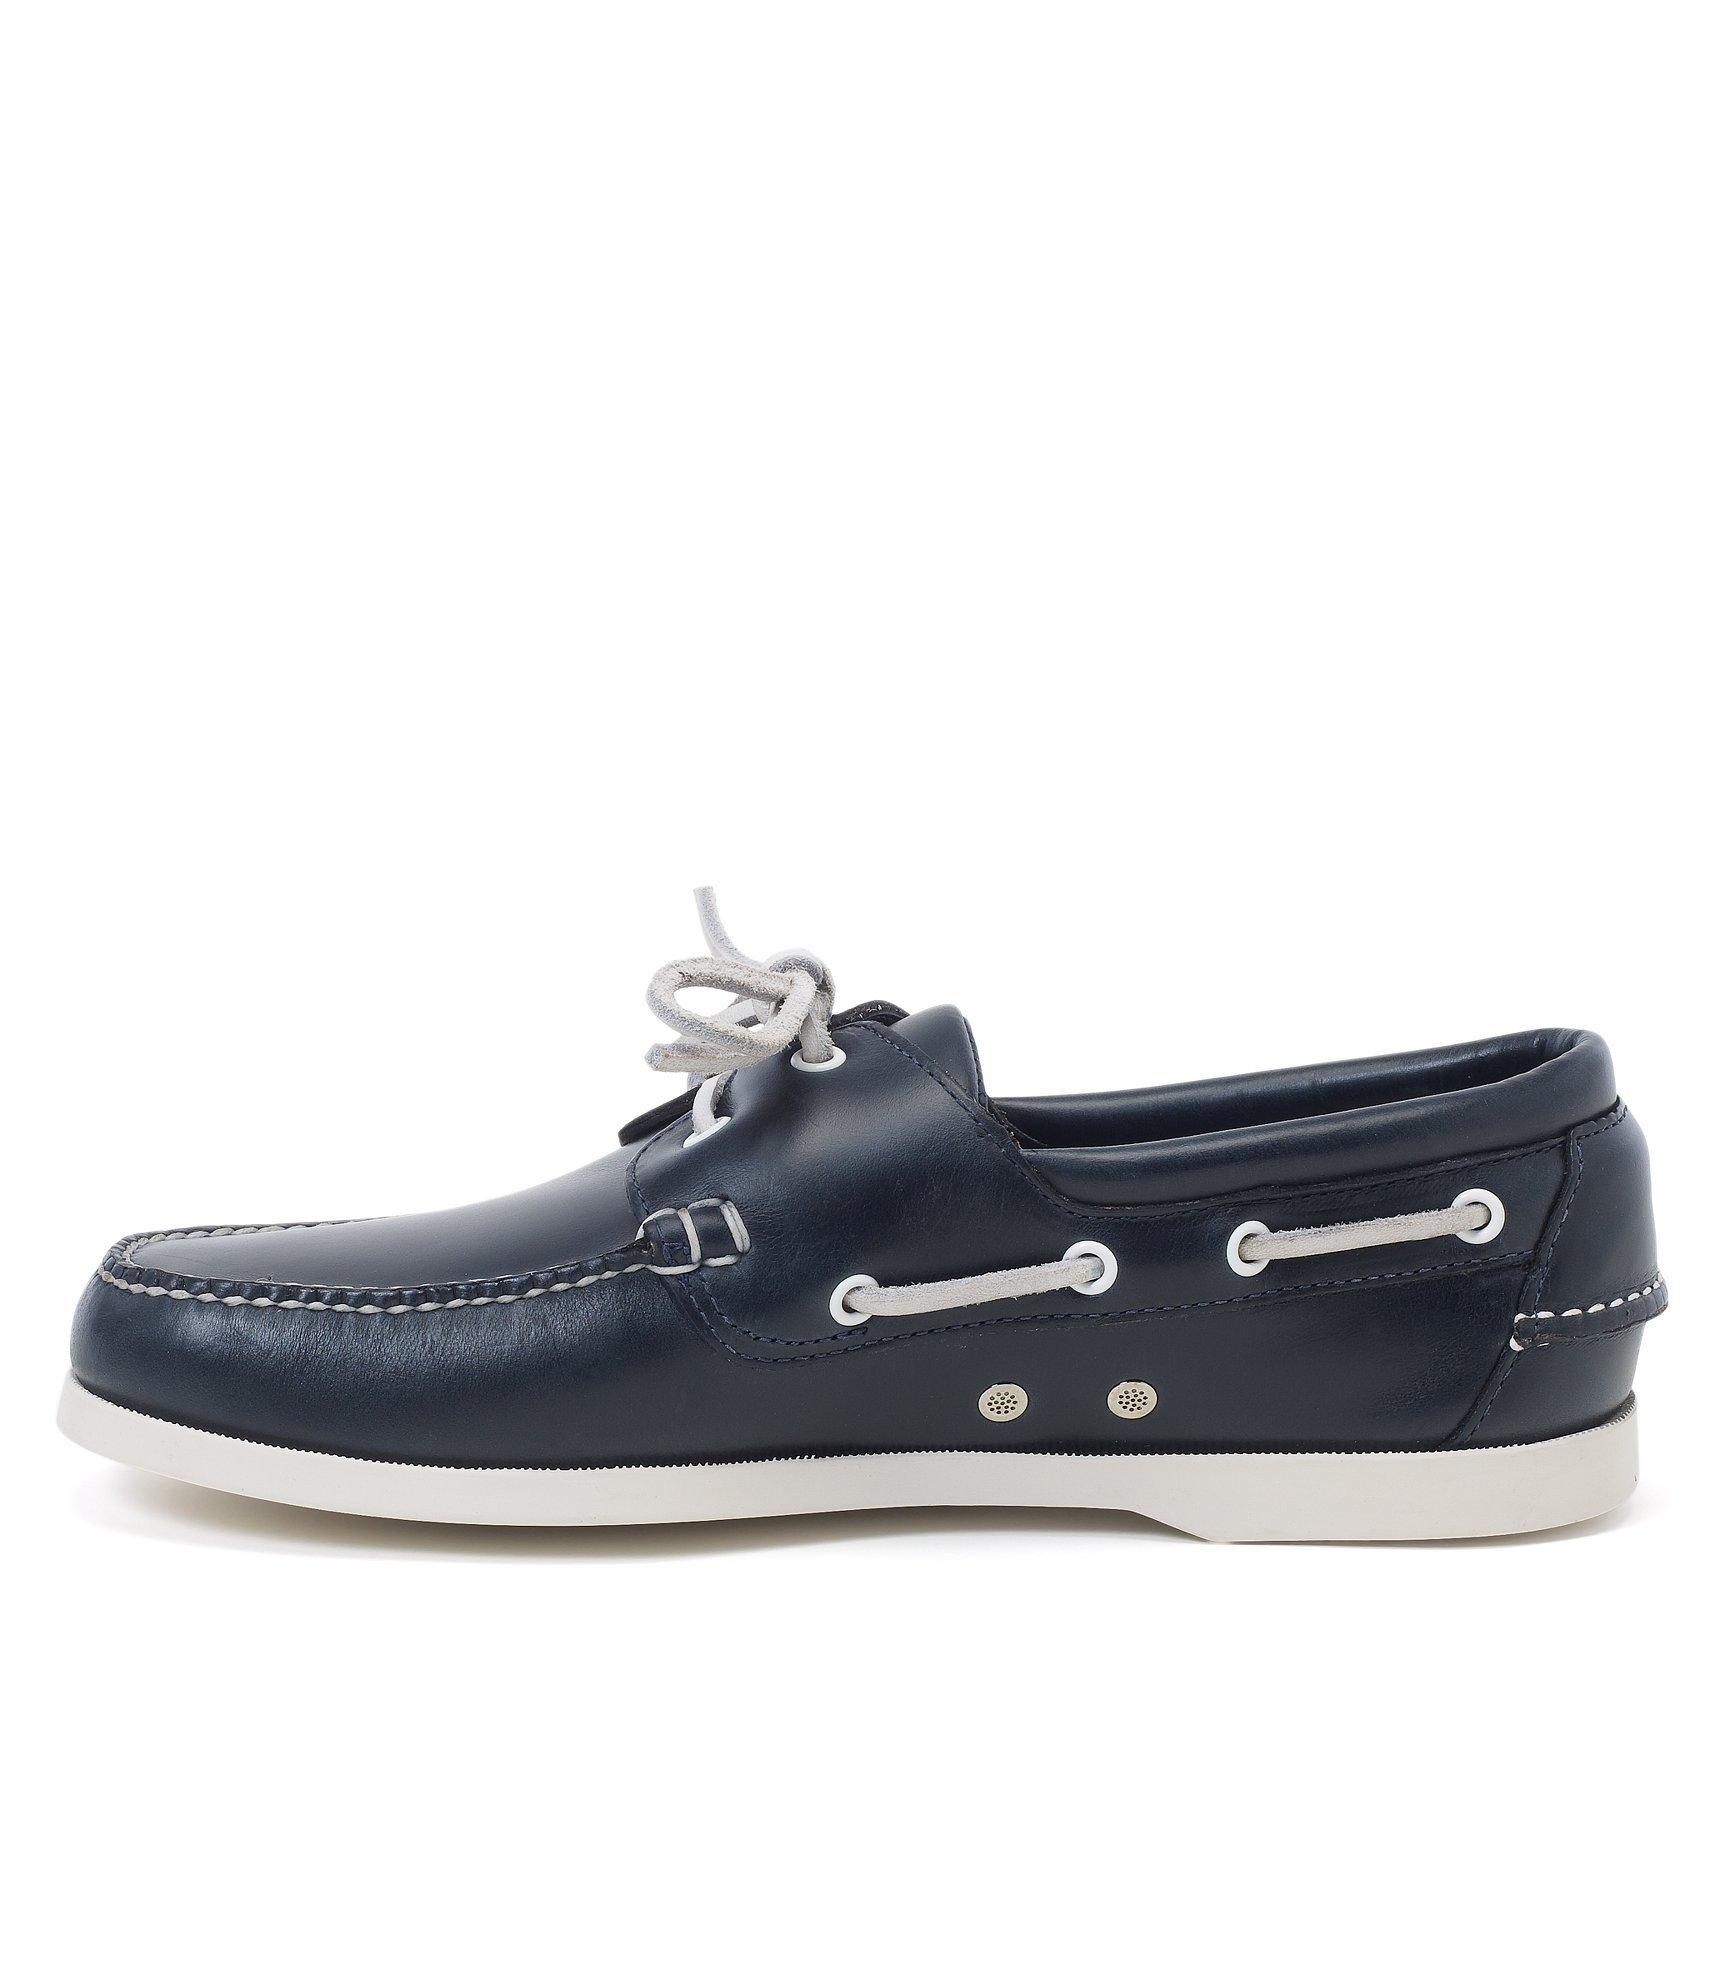 Who Makes Brooks Brothers Boat Shoes?